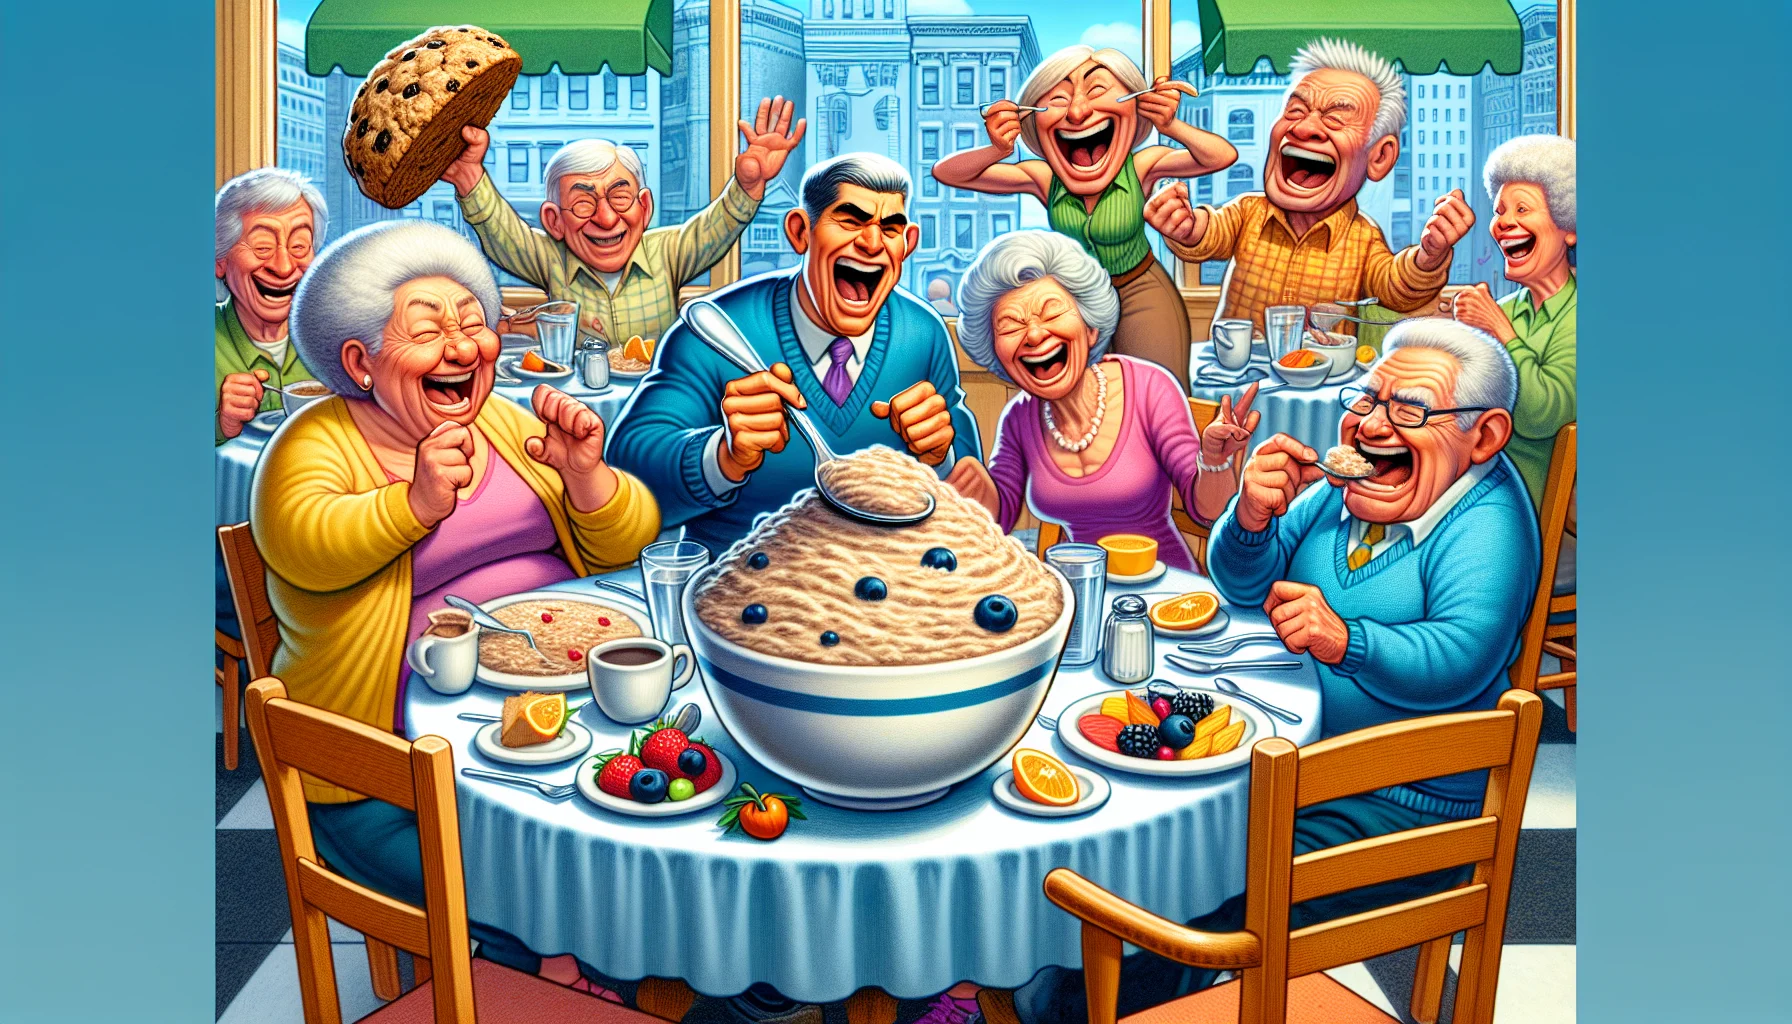 Illustrate a humorous, realistic scenario involving high fiber breakfast foods and elderly individuals. Picture this: a lively scene in a vibrant breakfast spot where a group of jovial seniors are merrily dining. They are passionately engaged in animated discussions about their dietary habits and healthy eating. In the middle of the table is an exaggeratedly large bowl of oatmeal, topped with fresh fruits and a giant spoon sticking out, attracting a few raised eyebrows and shared laughs. A lively, elderly Hispanic woman is eagerly lecturing about the benefits of fiber, while a quirky, elderly Caucasian man trying to take a bite of a humorous oversized bran muffin, is causing everyone to erupt in laughter.